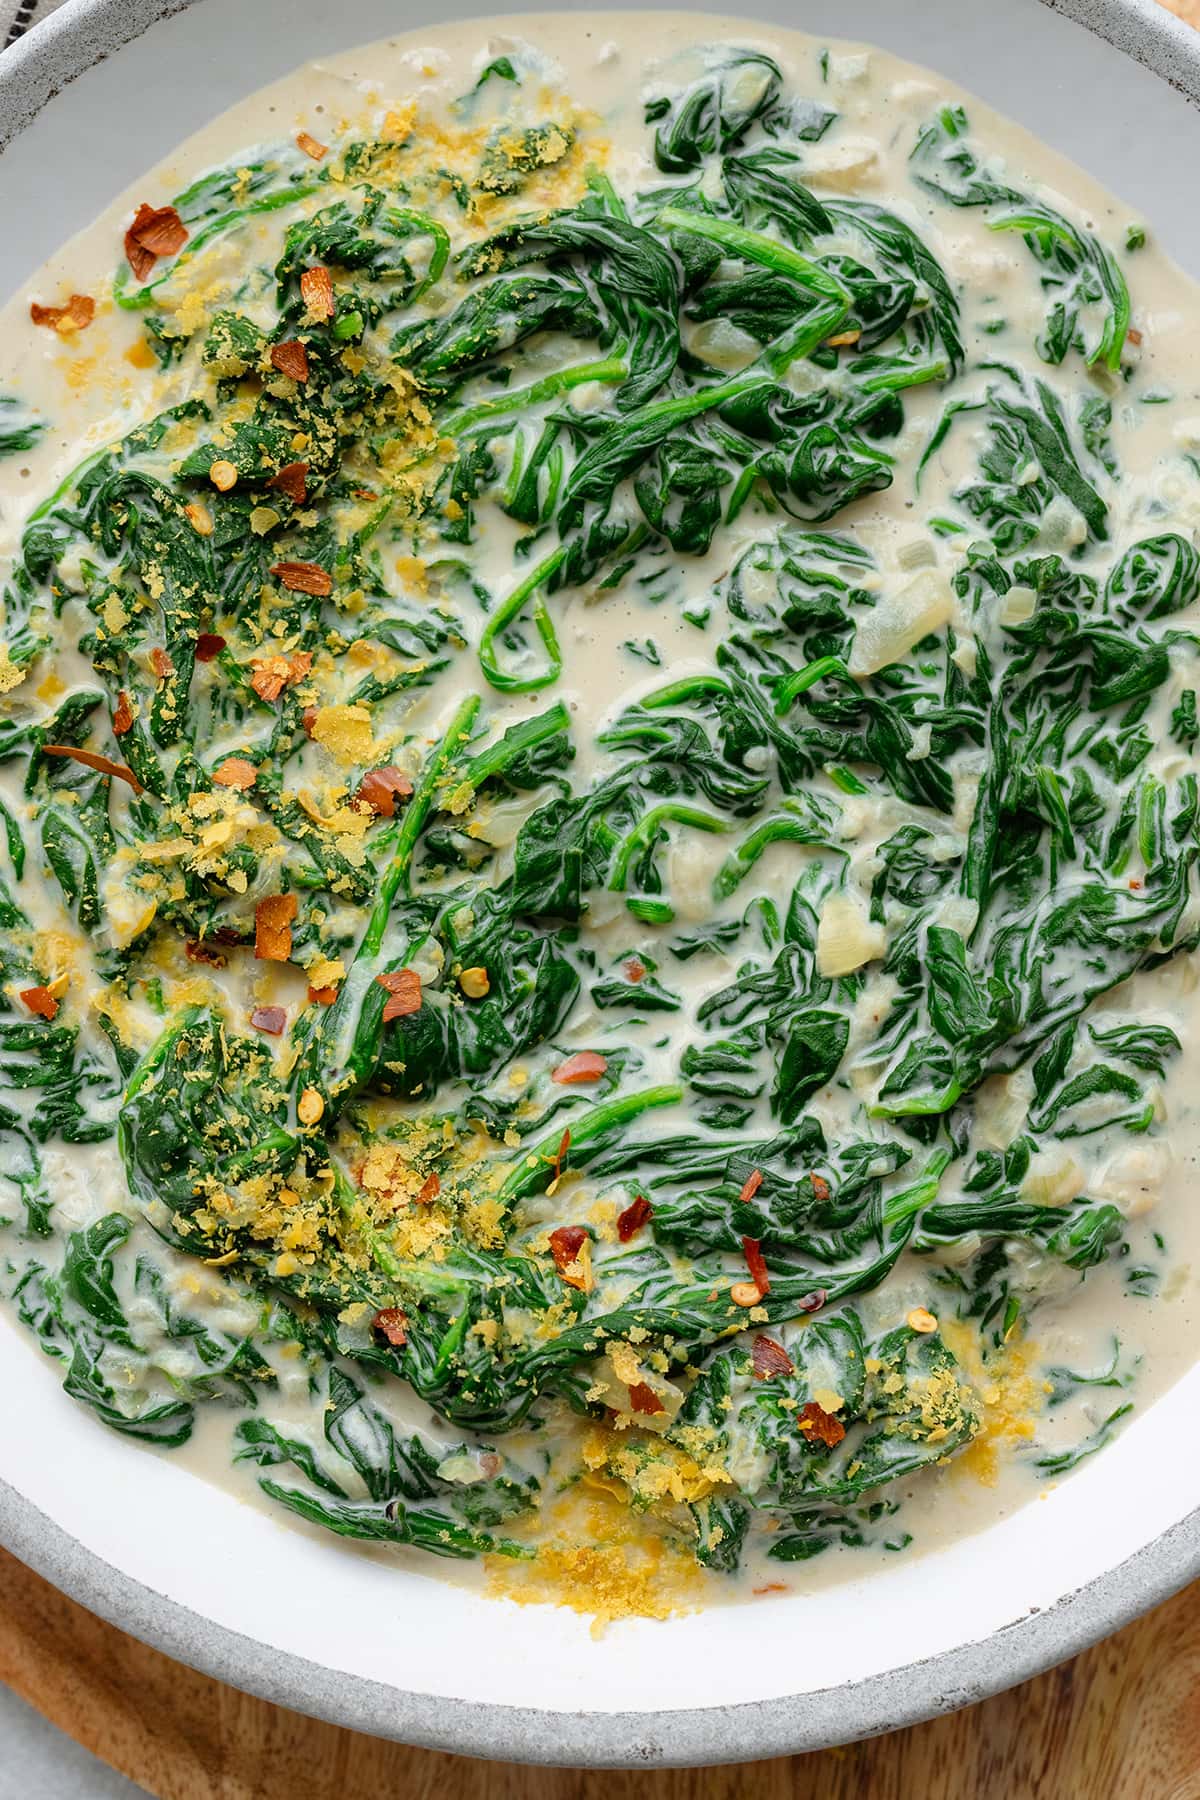 A close up of Creamed spinach on a grey ceramic bowl sprinkled with nutritional yeast and chili flakes.